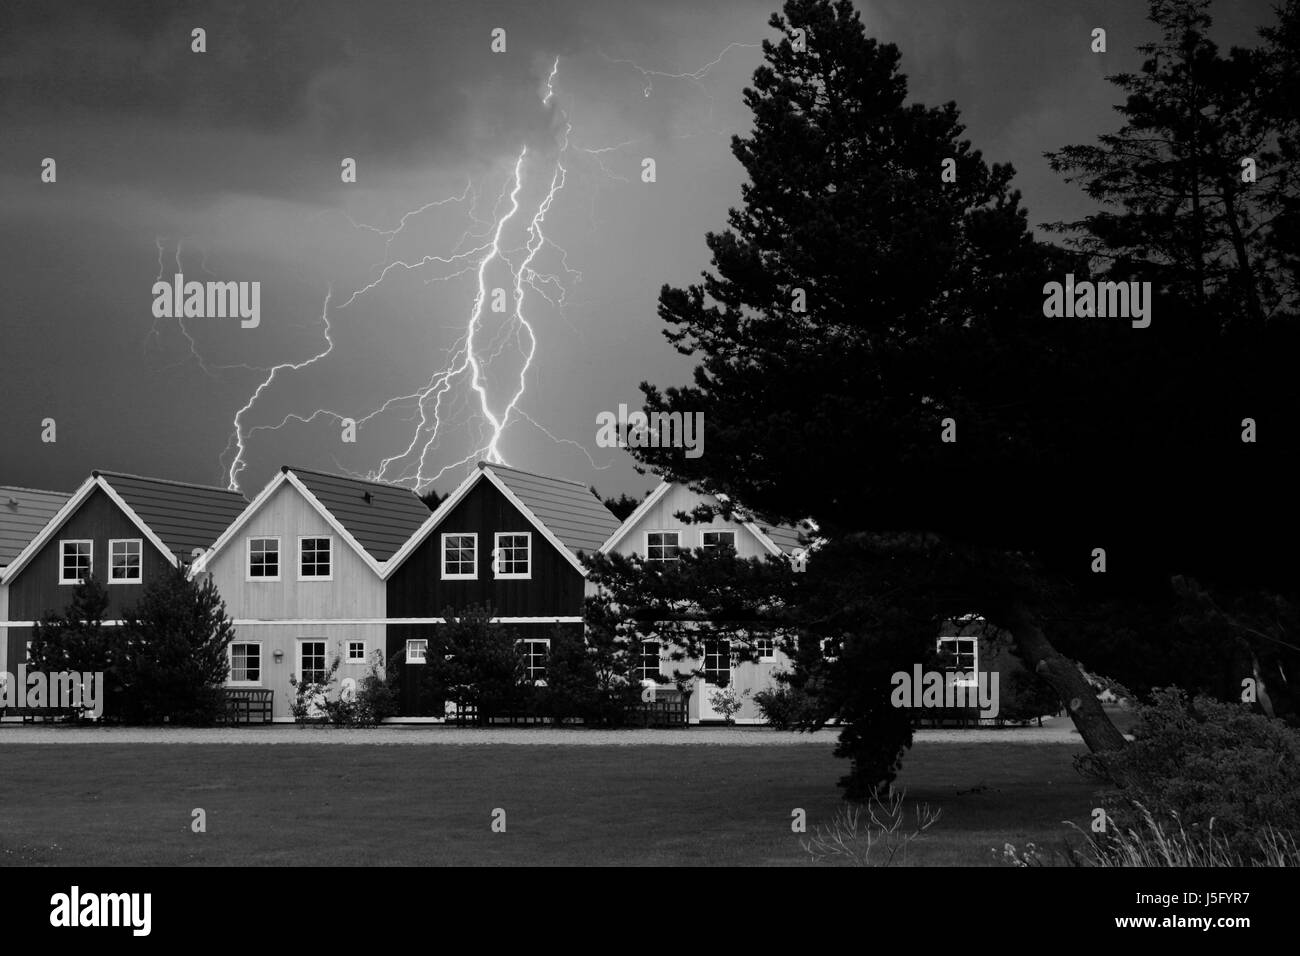 houses with thunderstorms Stock Photo